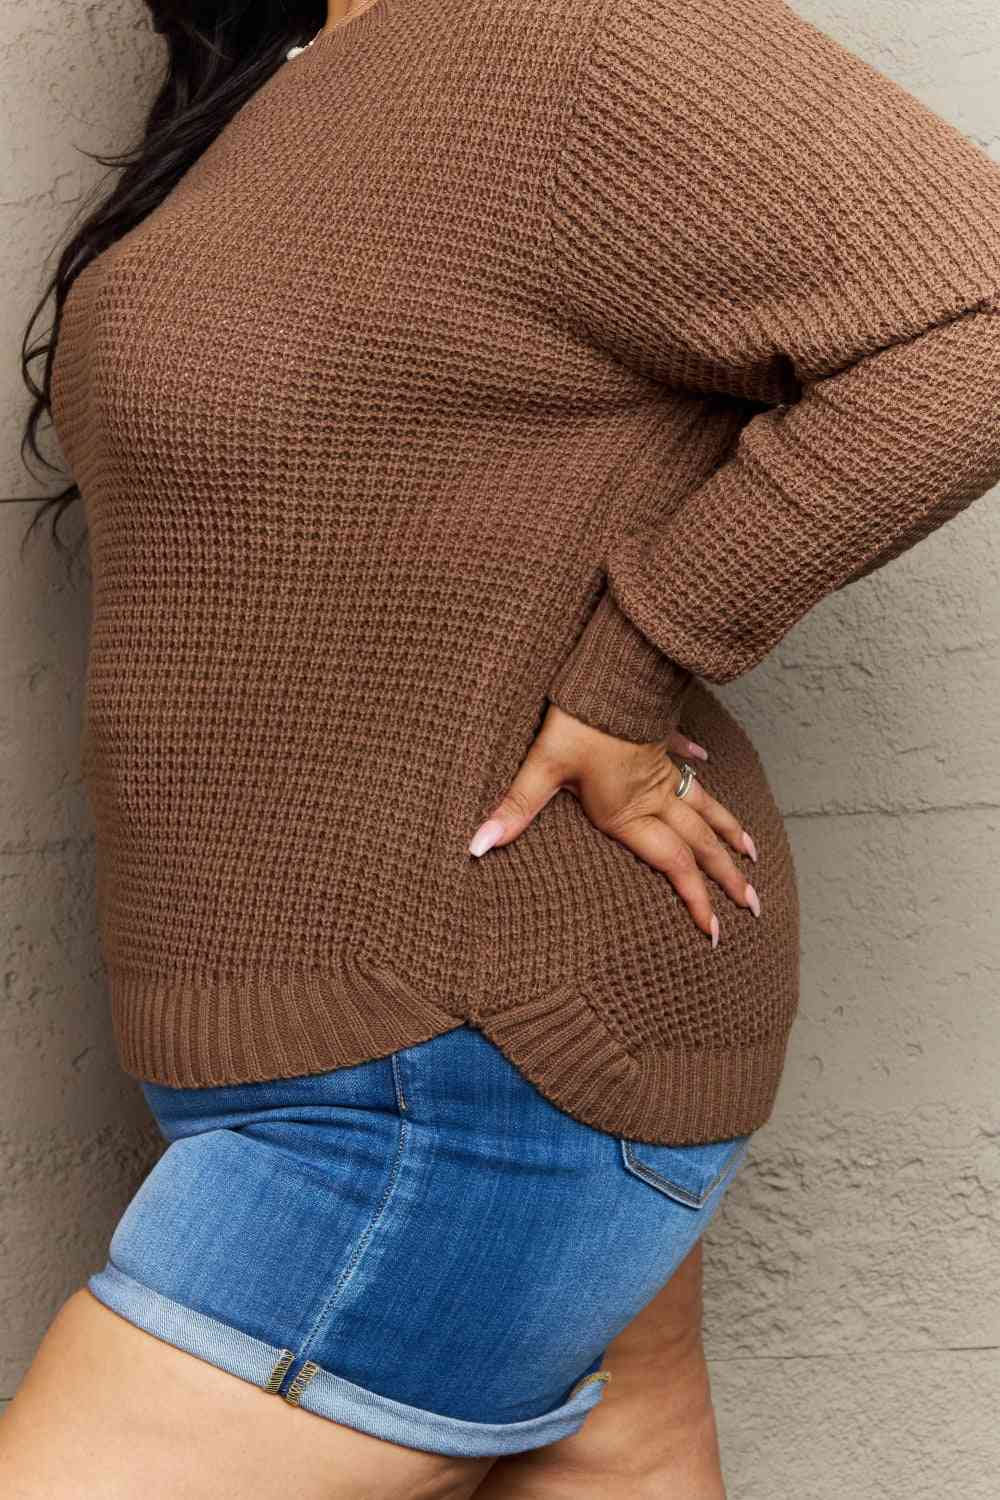 Zenana Breezy Days Plus Size High Low Waffle Knit Sweater - Pullover Sweaters - FITGGINS